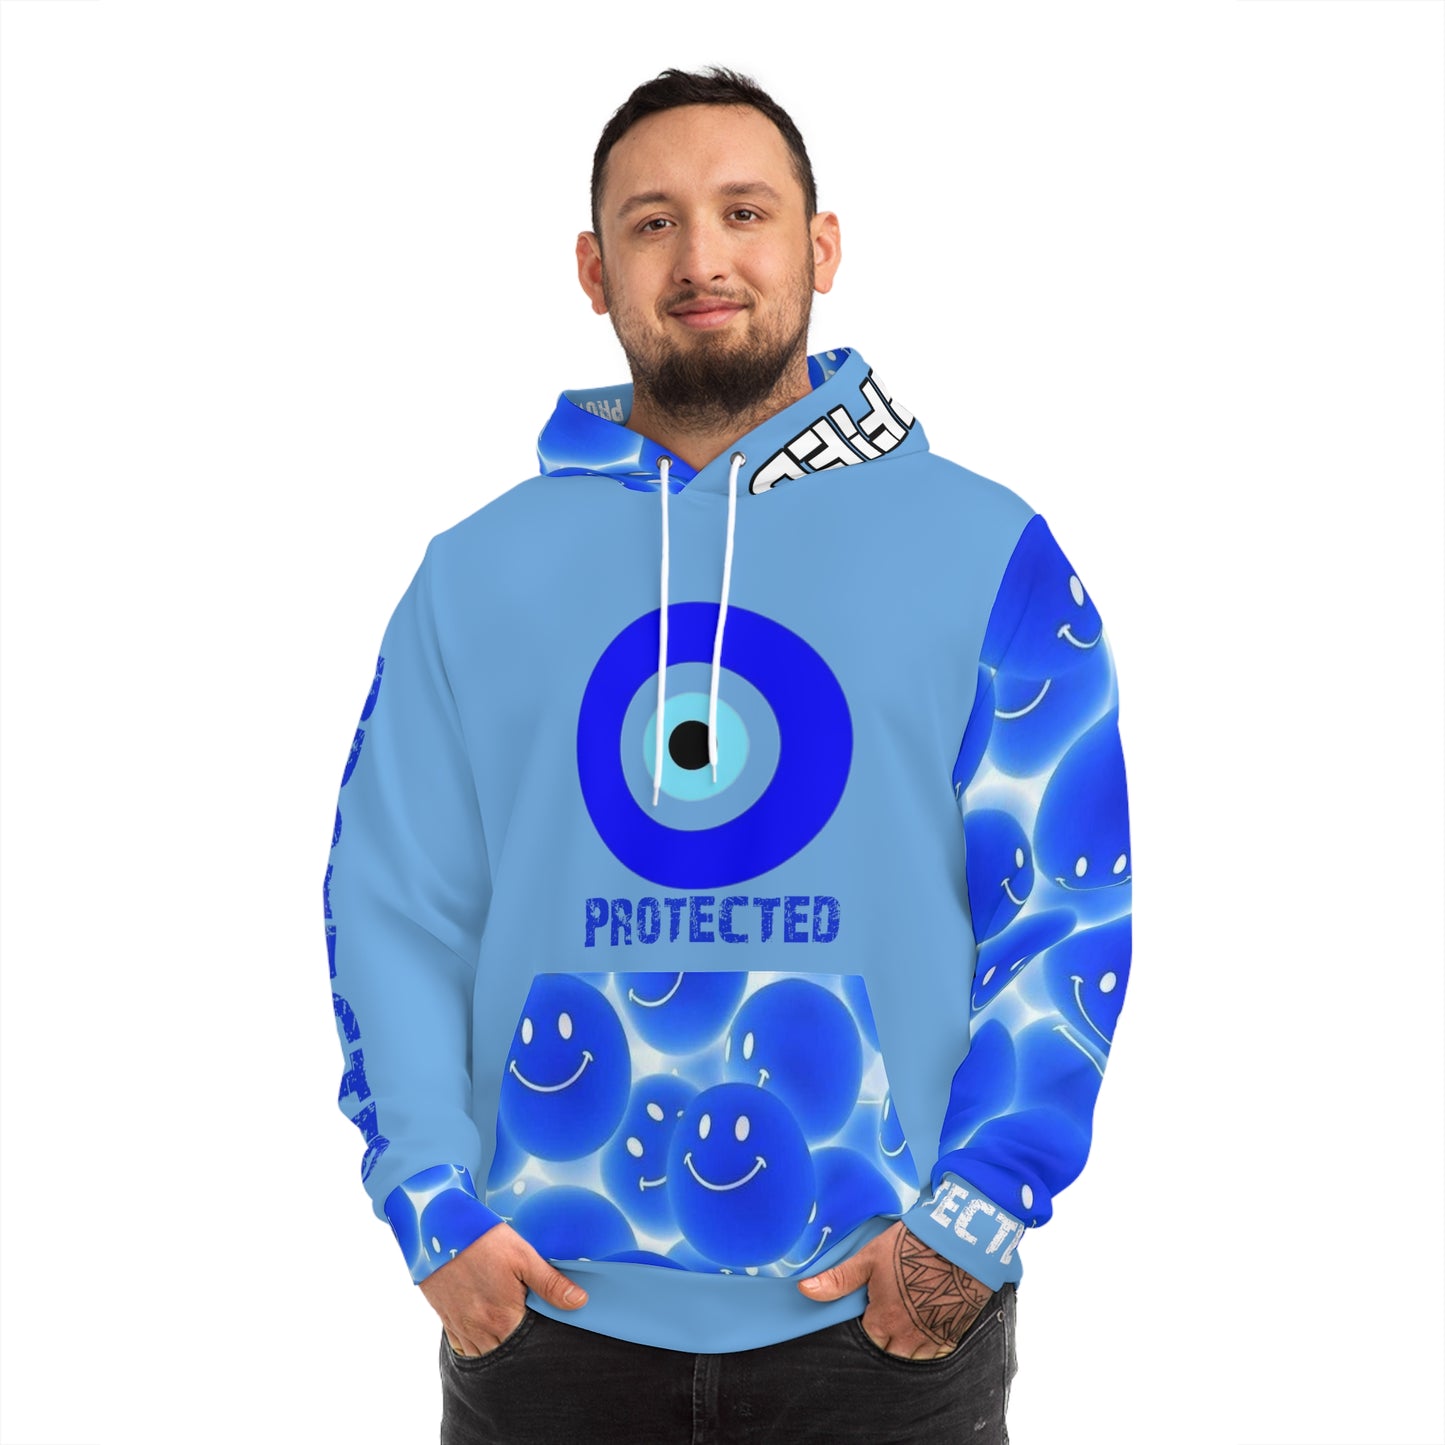 Protected DOPiFiED Fashion Hoodie